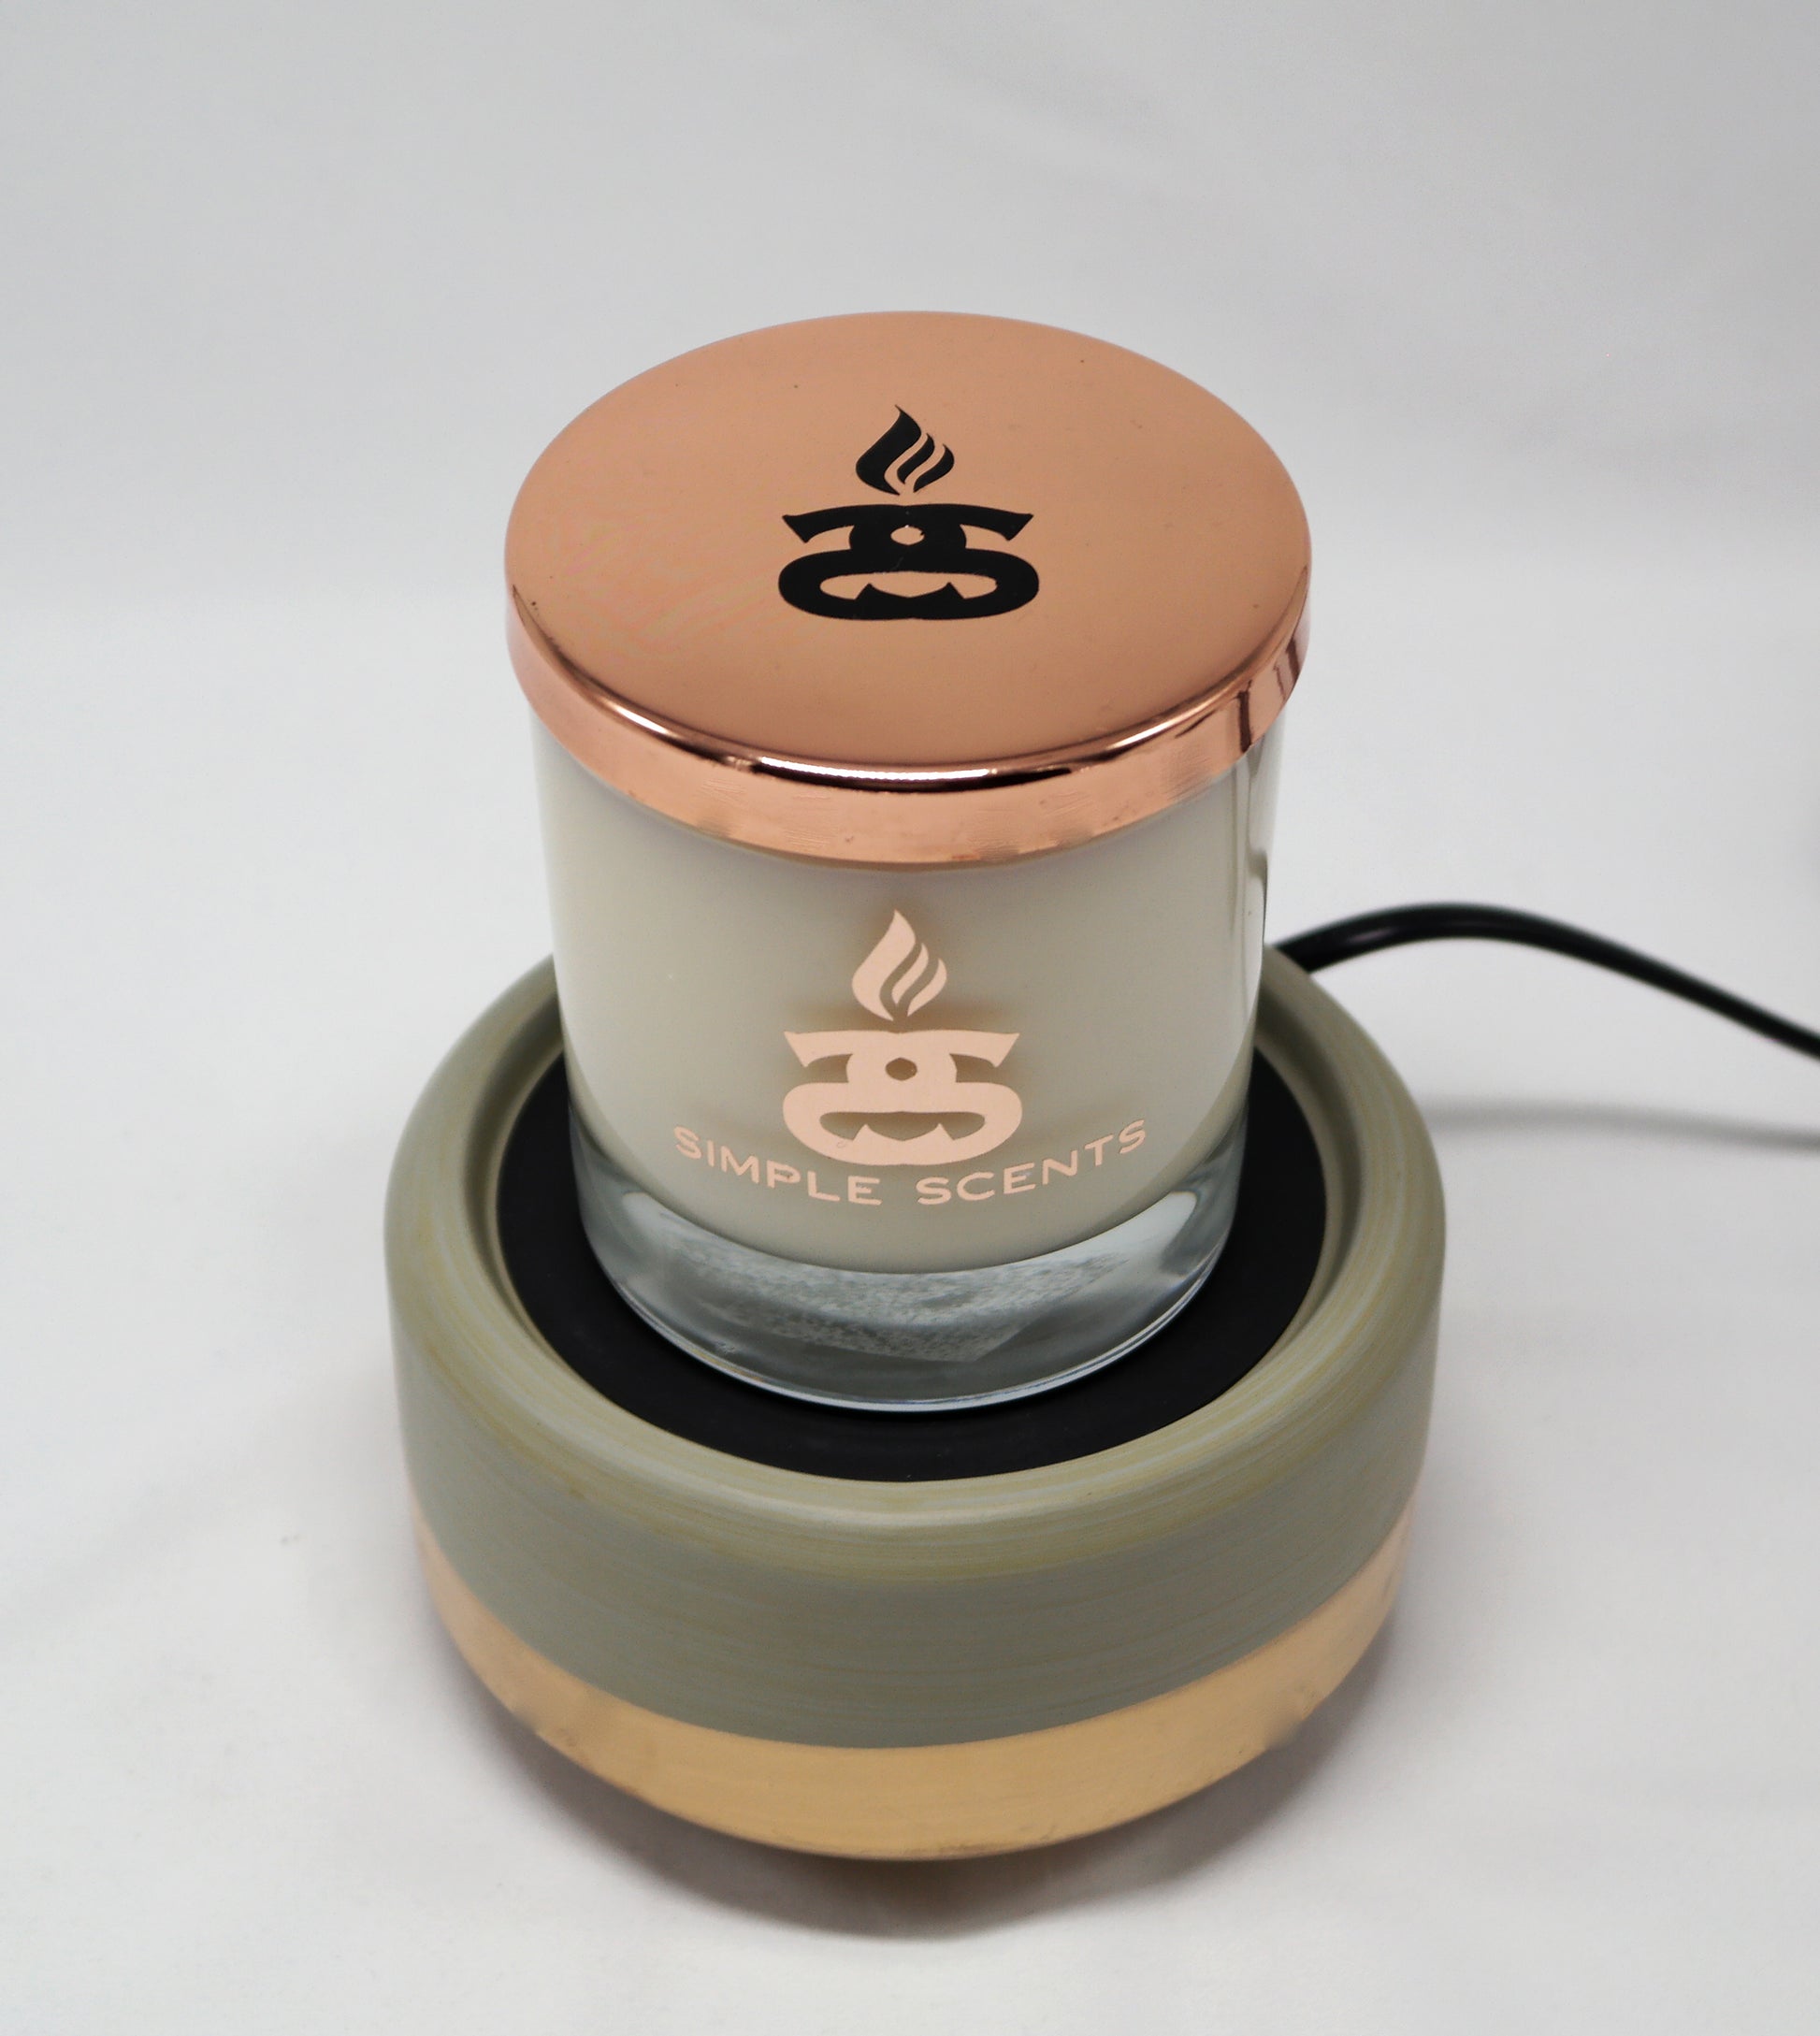 Grey & Rose Gold Ceramic Electric Wax Melter & Candle Warmer